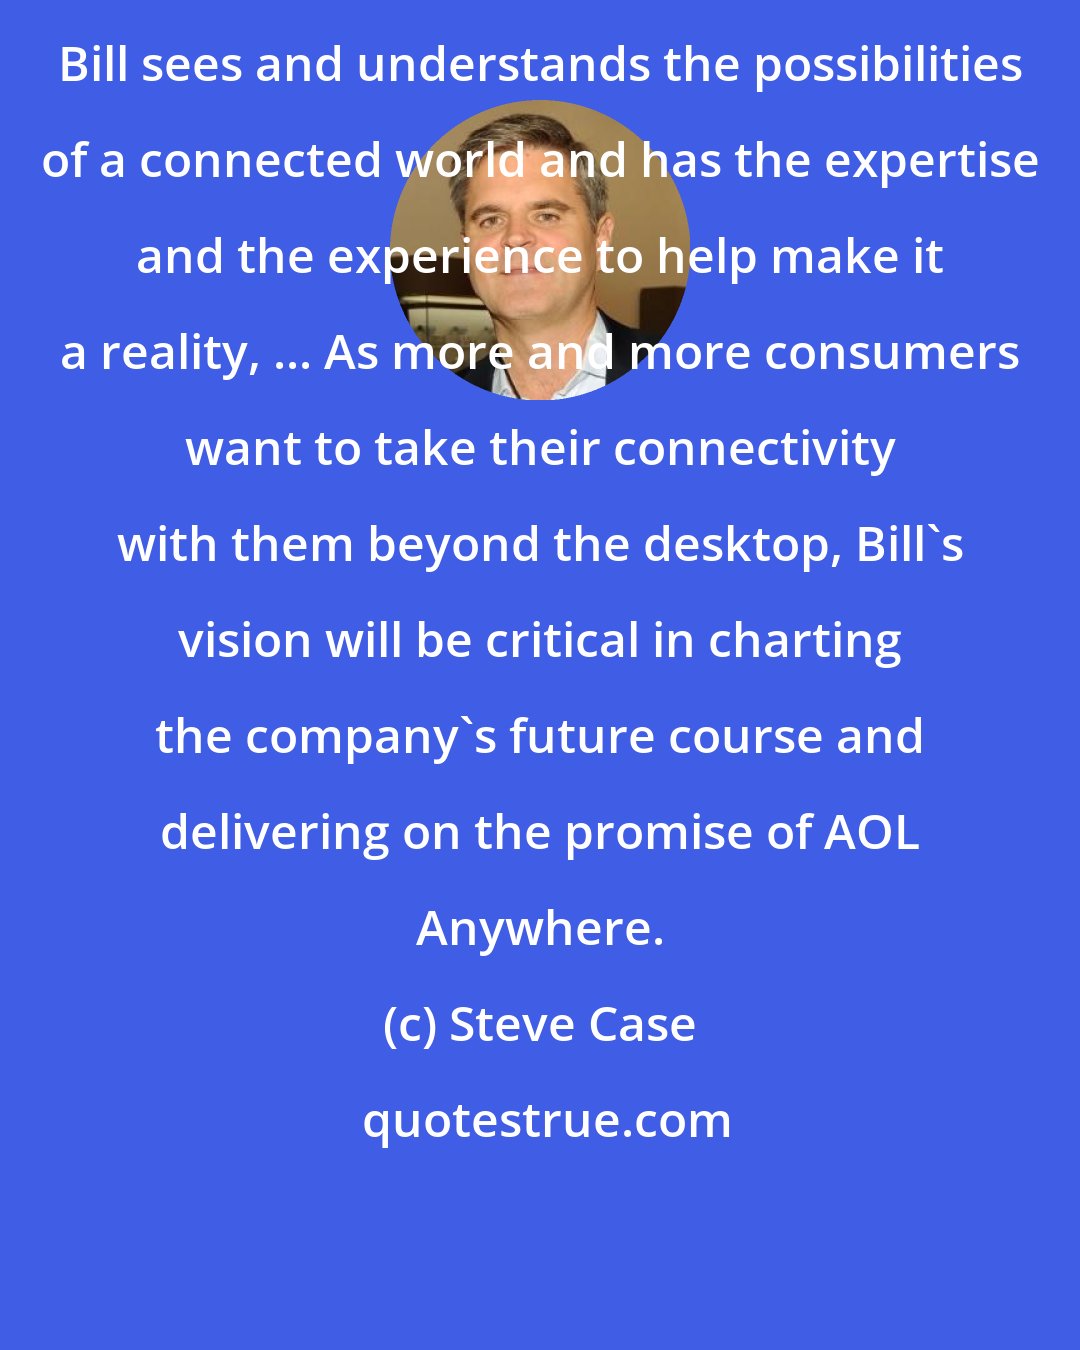 Steve Case: Bill sees and understands the possibilities of a connected world and has the expertise and the experience to help make it a reality, ... As more and more consumers want to take their connectivity with them beyond the desktop, Bill's vision will be critical in charting the company's future course and delivering on the promise of AOL Anywhere.